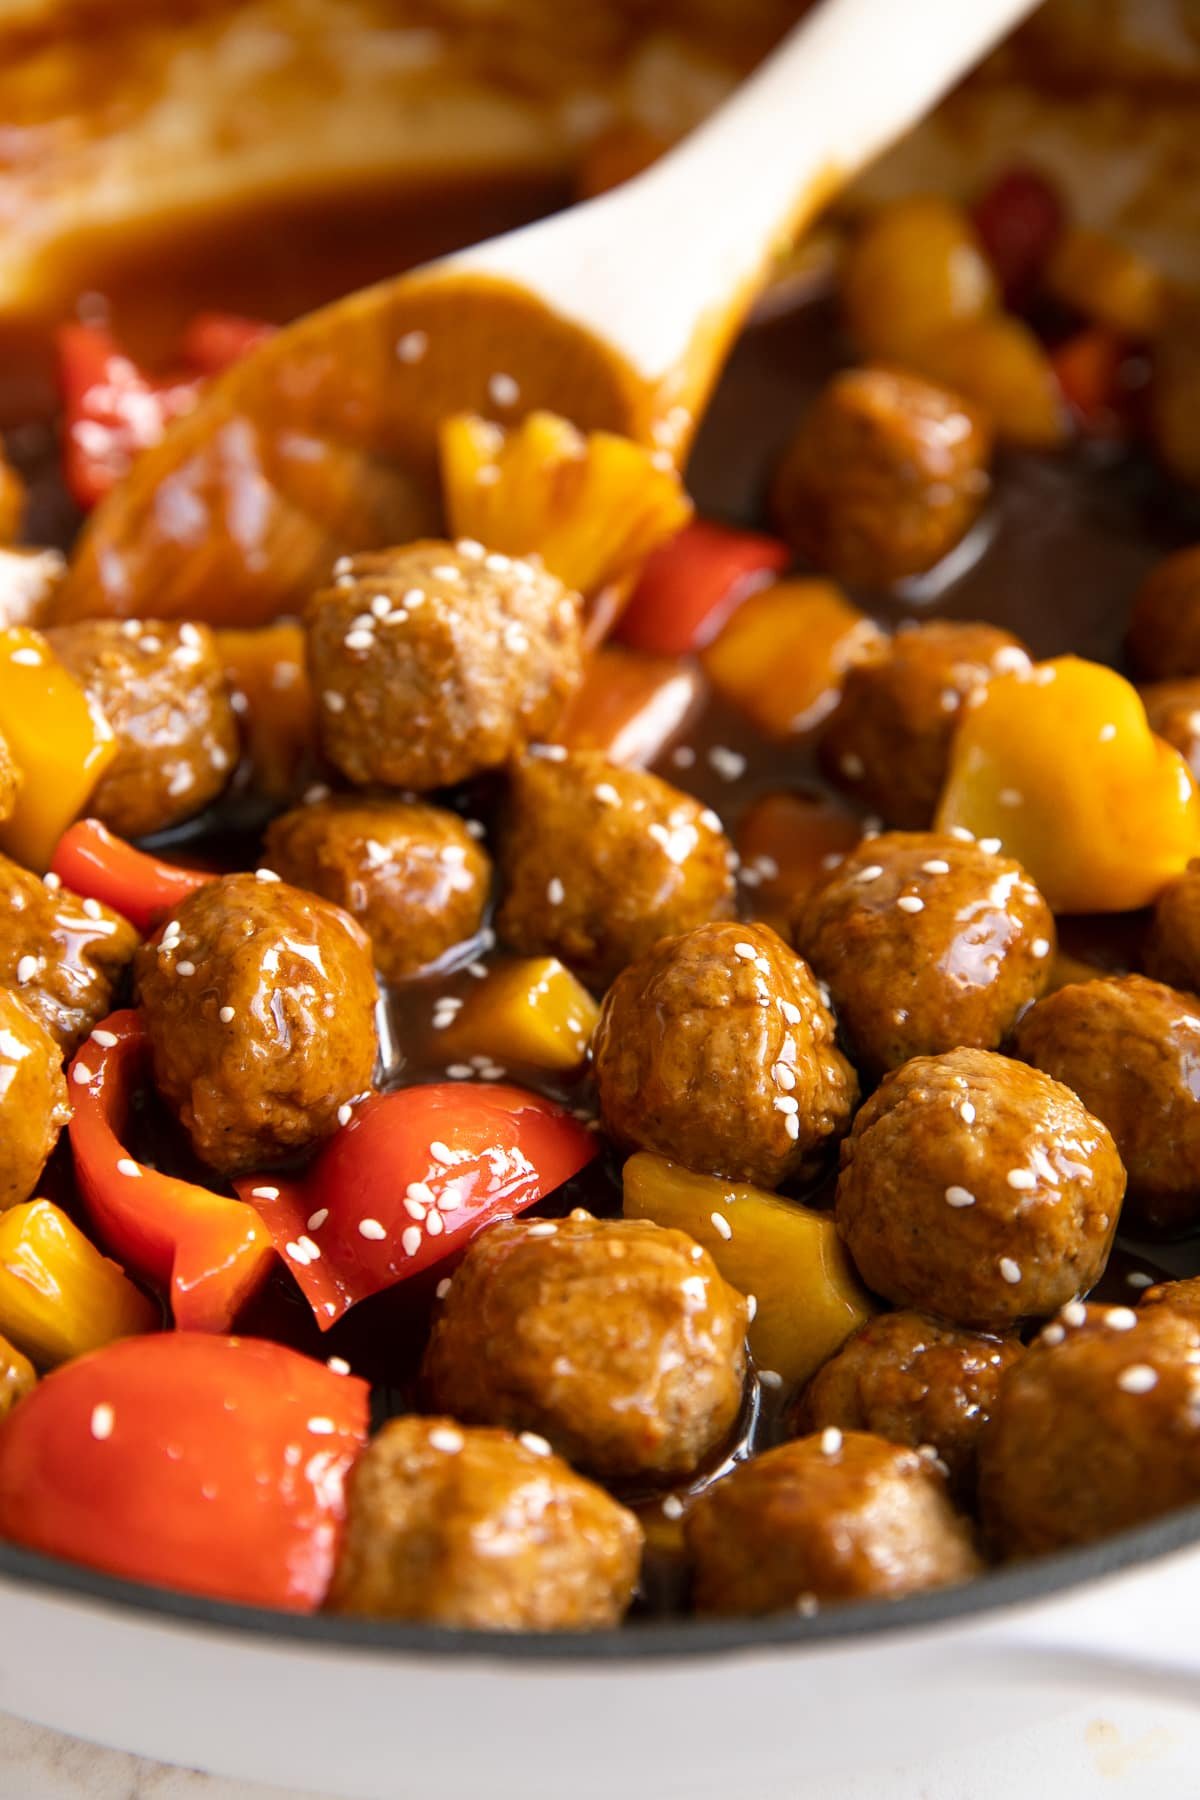 Close up image of a pan filled with sweet and sour meatballs.